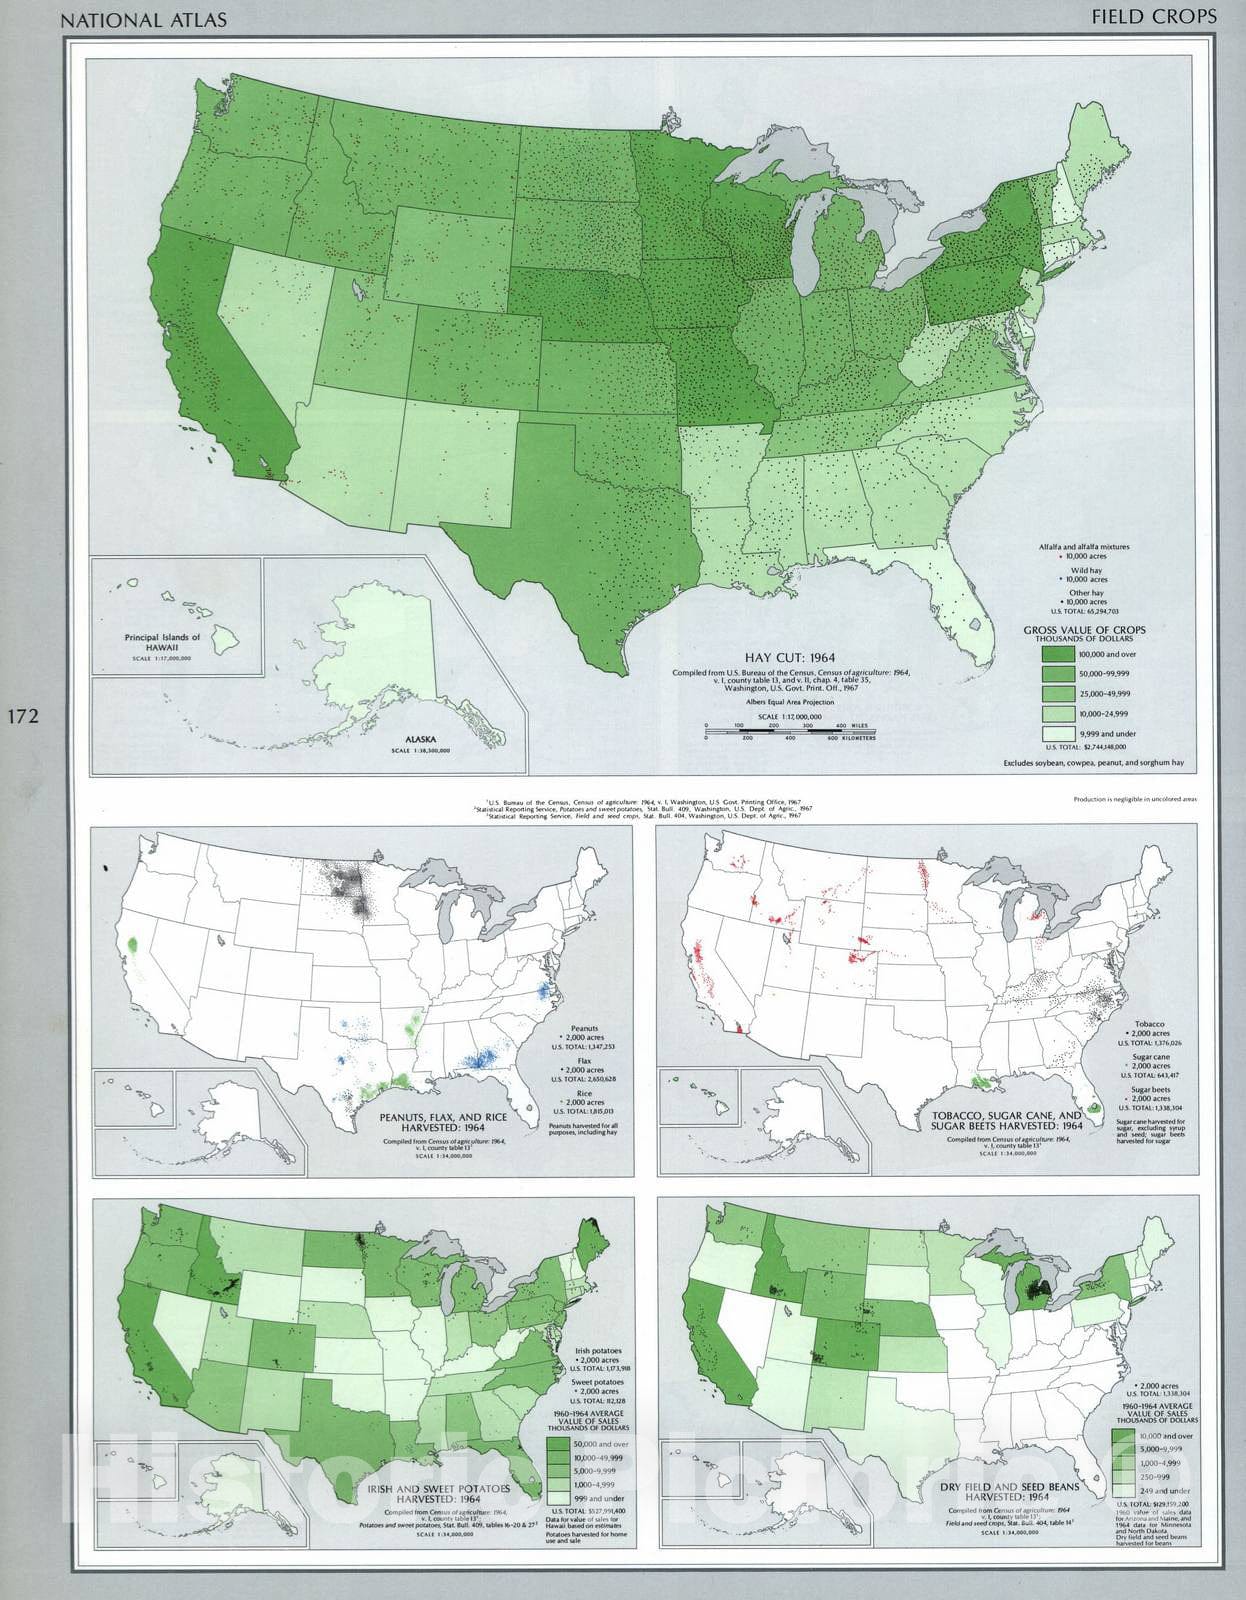 Historic 1970 Map - The National Atlas of The United States of America. - Field Crops